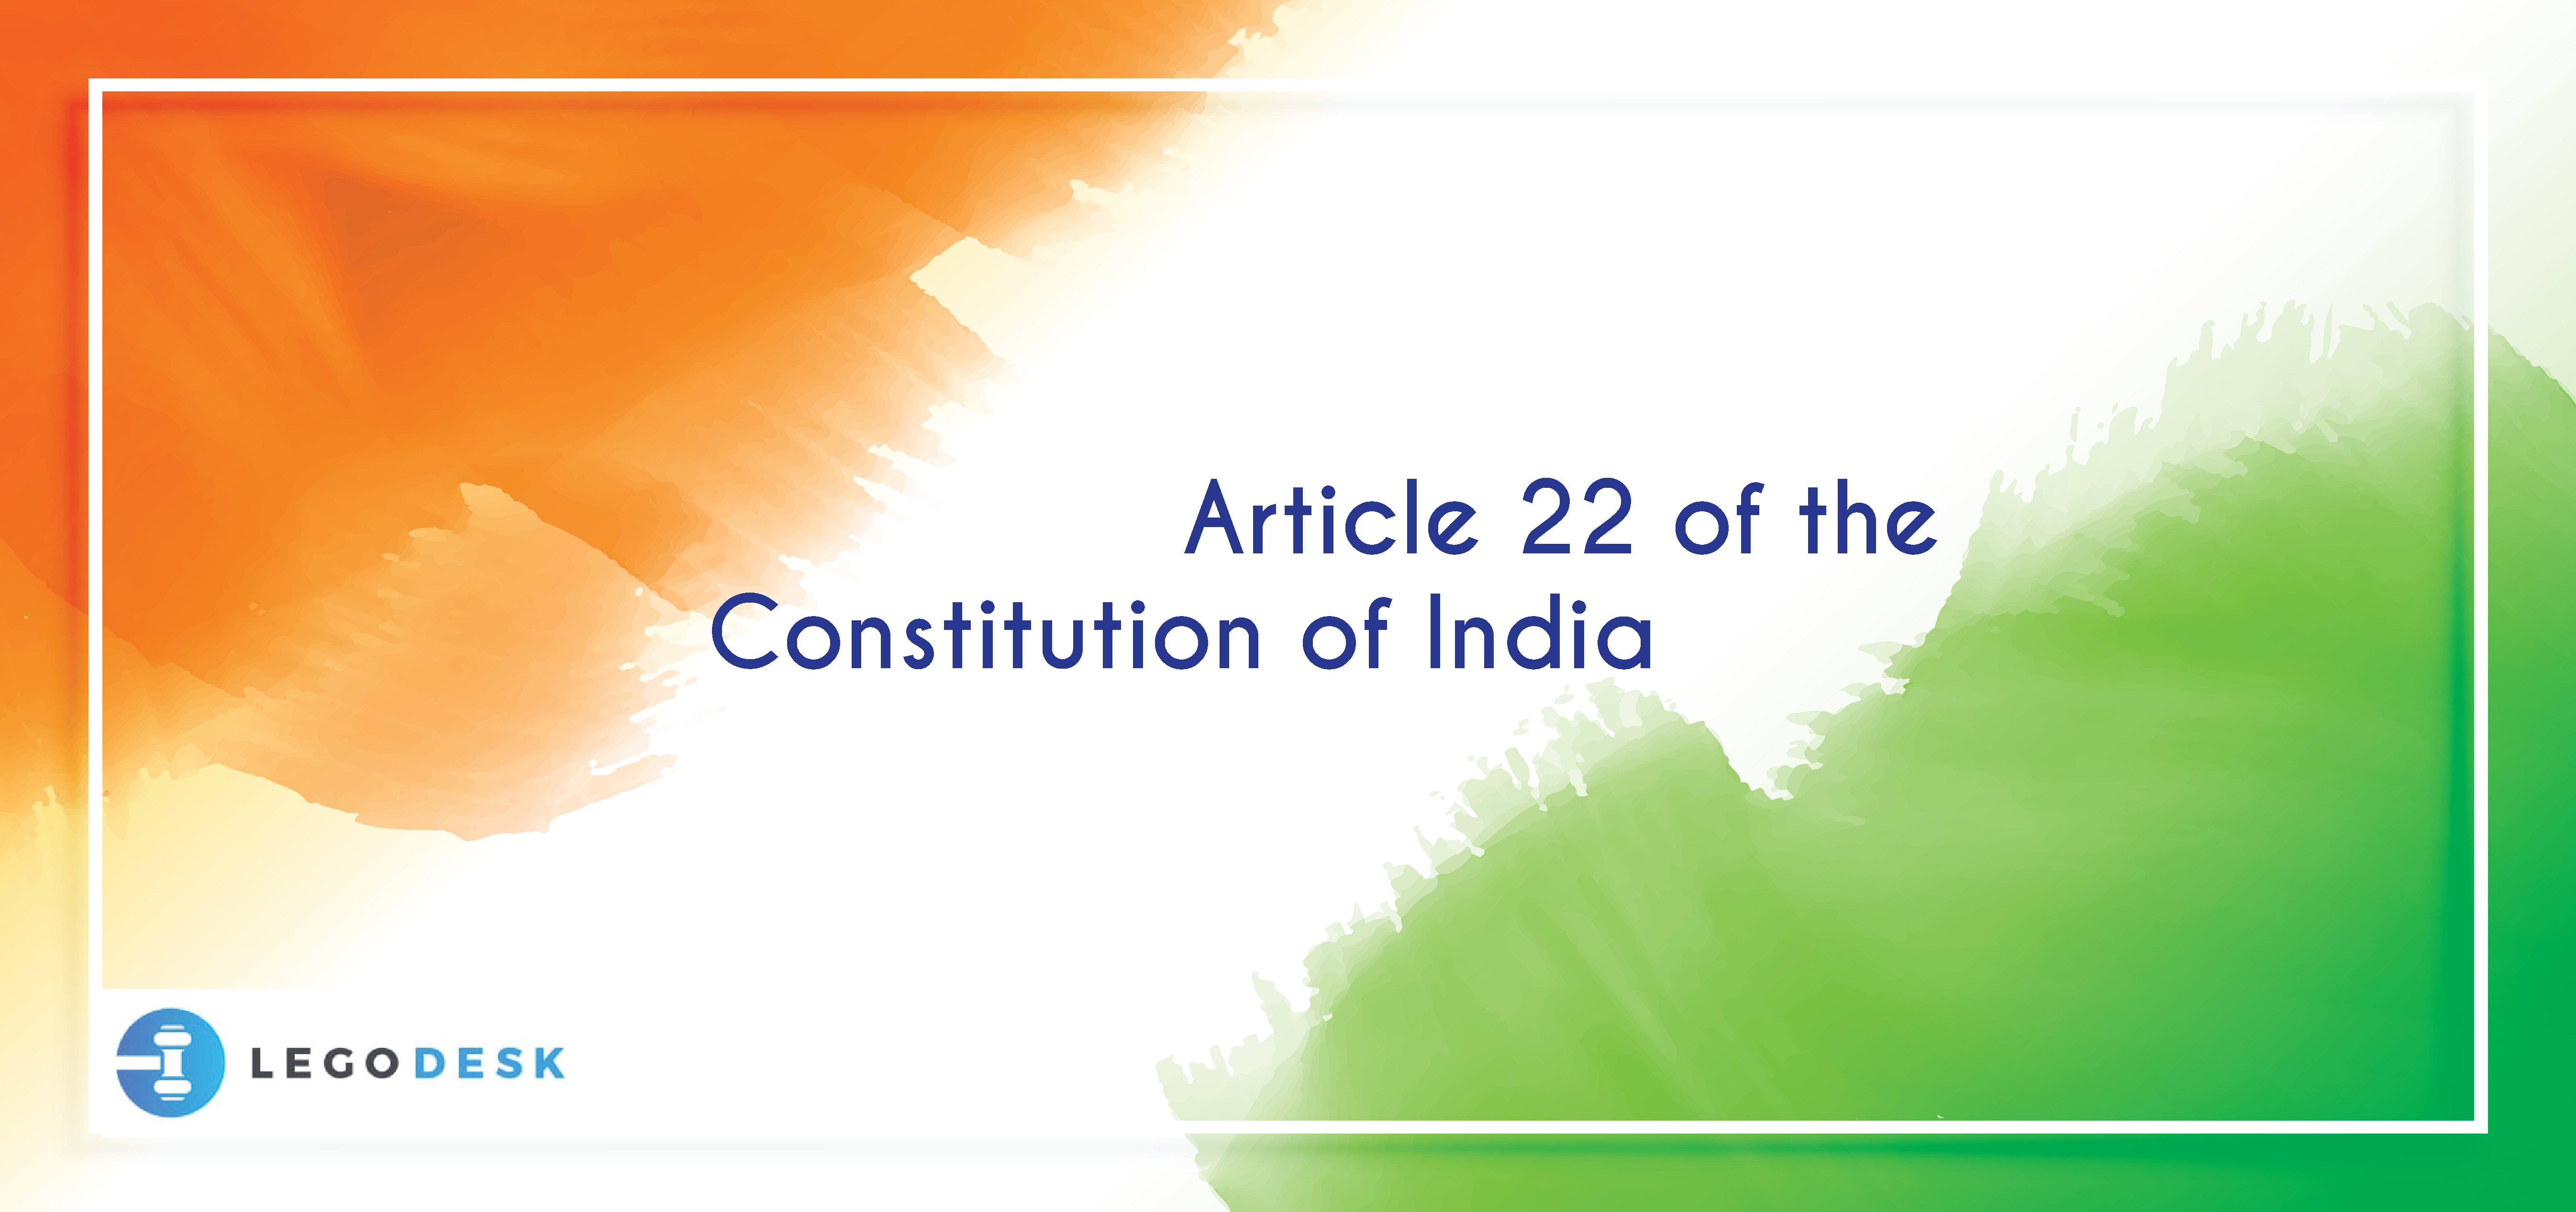 Article 22 of the Constitution of India